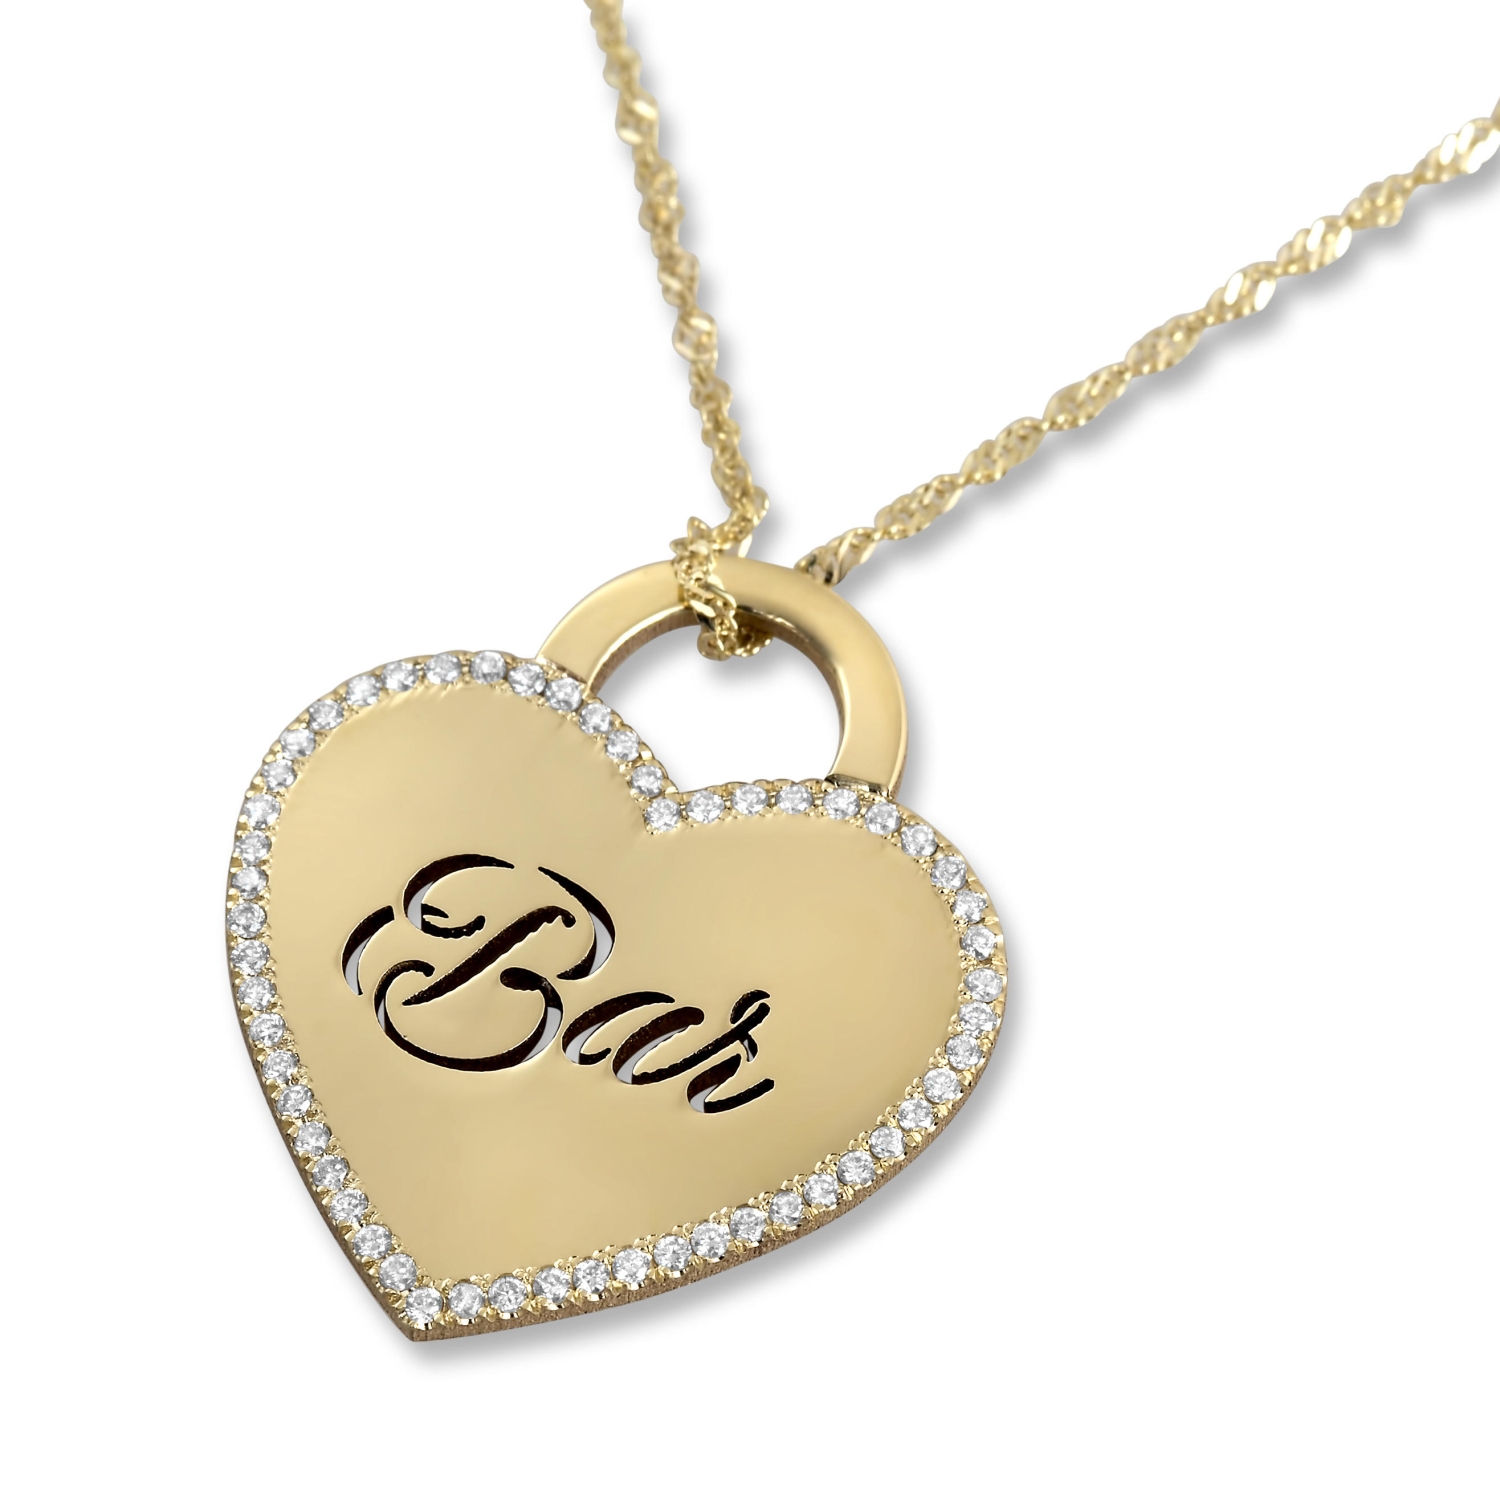 14K Yellow Gold Heart Name Necklace with Diamond Border - 1